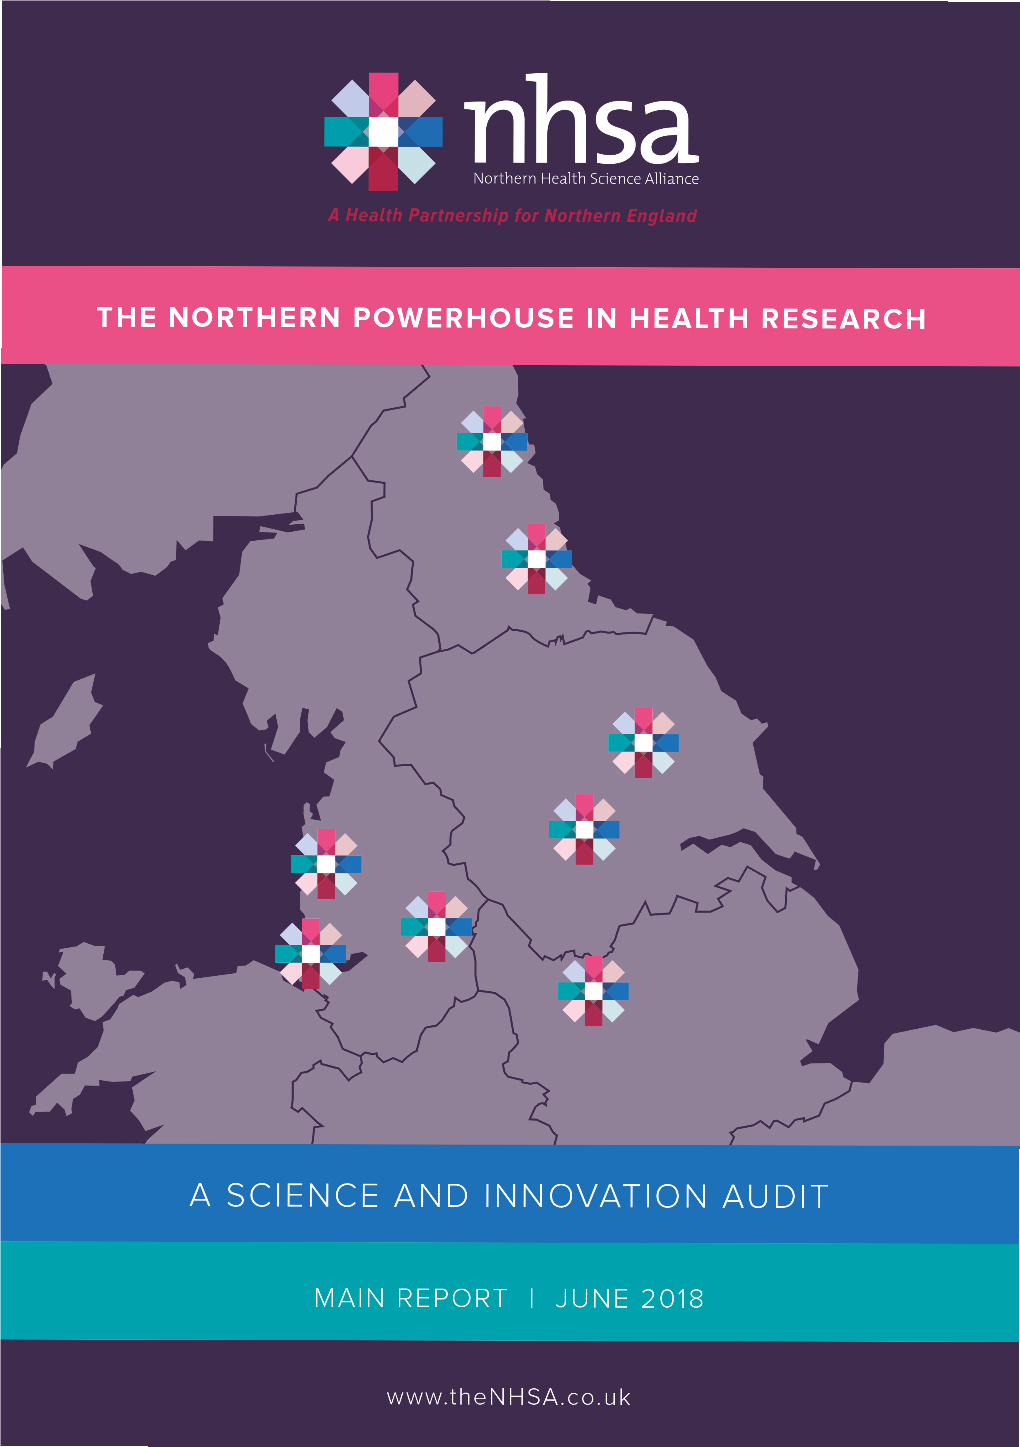 The Northern Powerhouse in Health Health Science Alliance Ltd Research - a Science and Innovation Audit